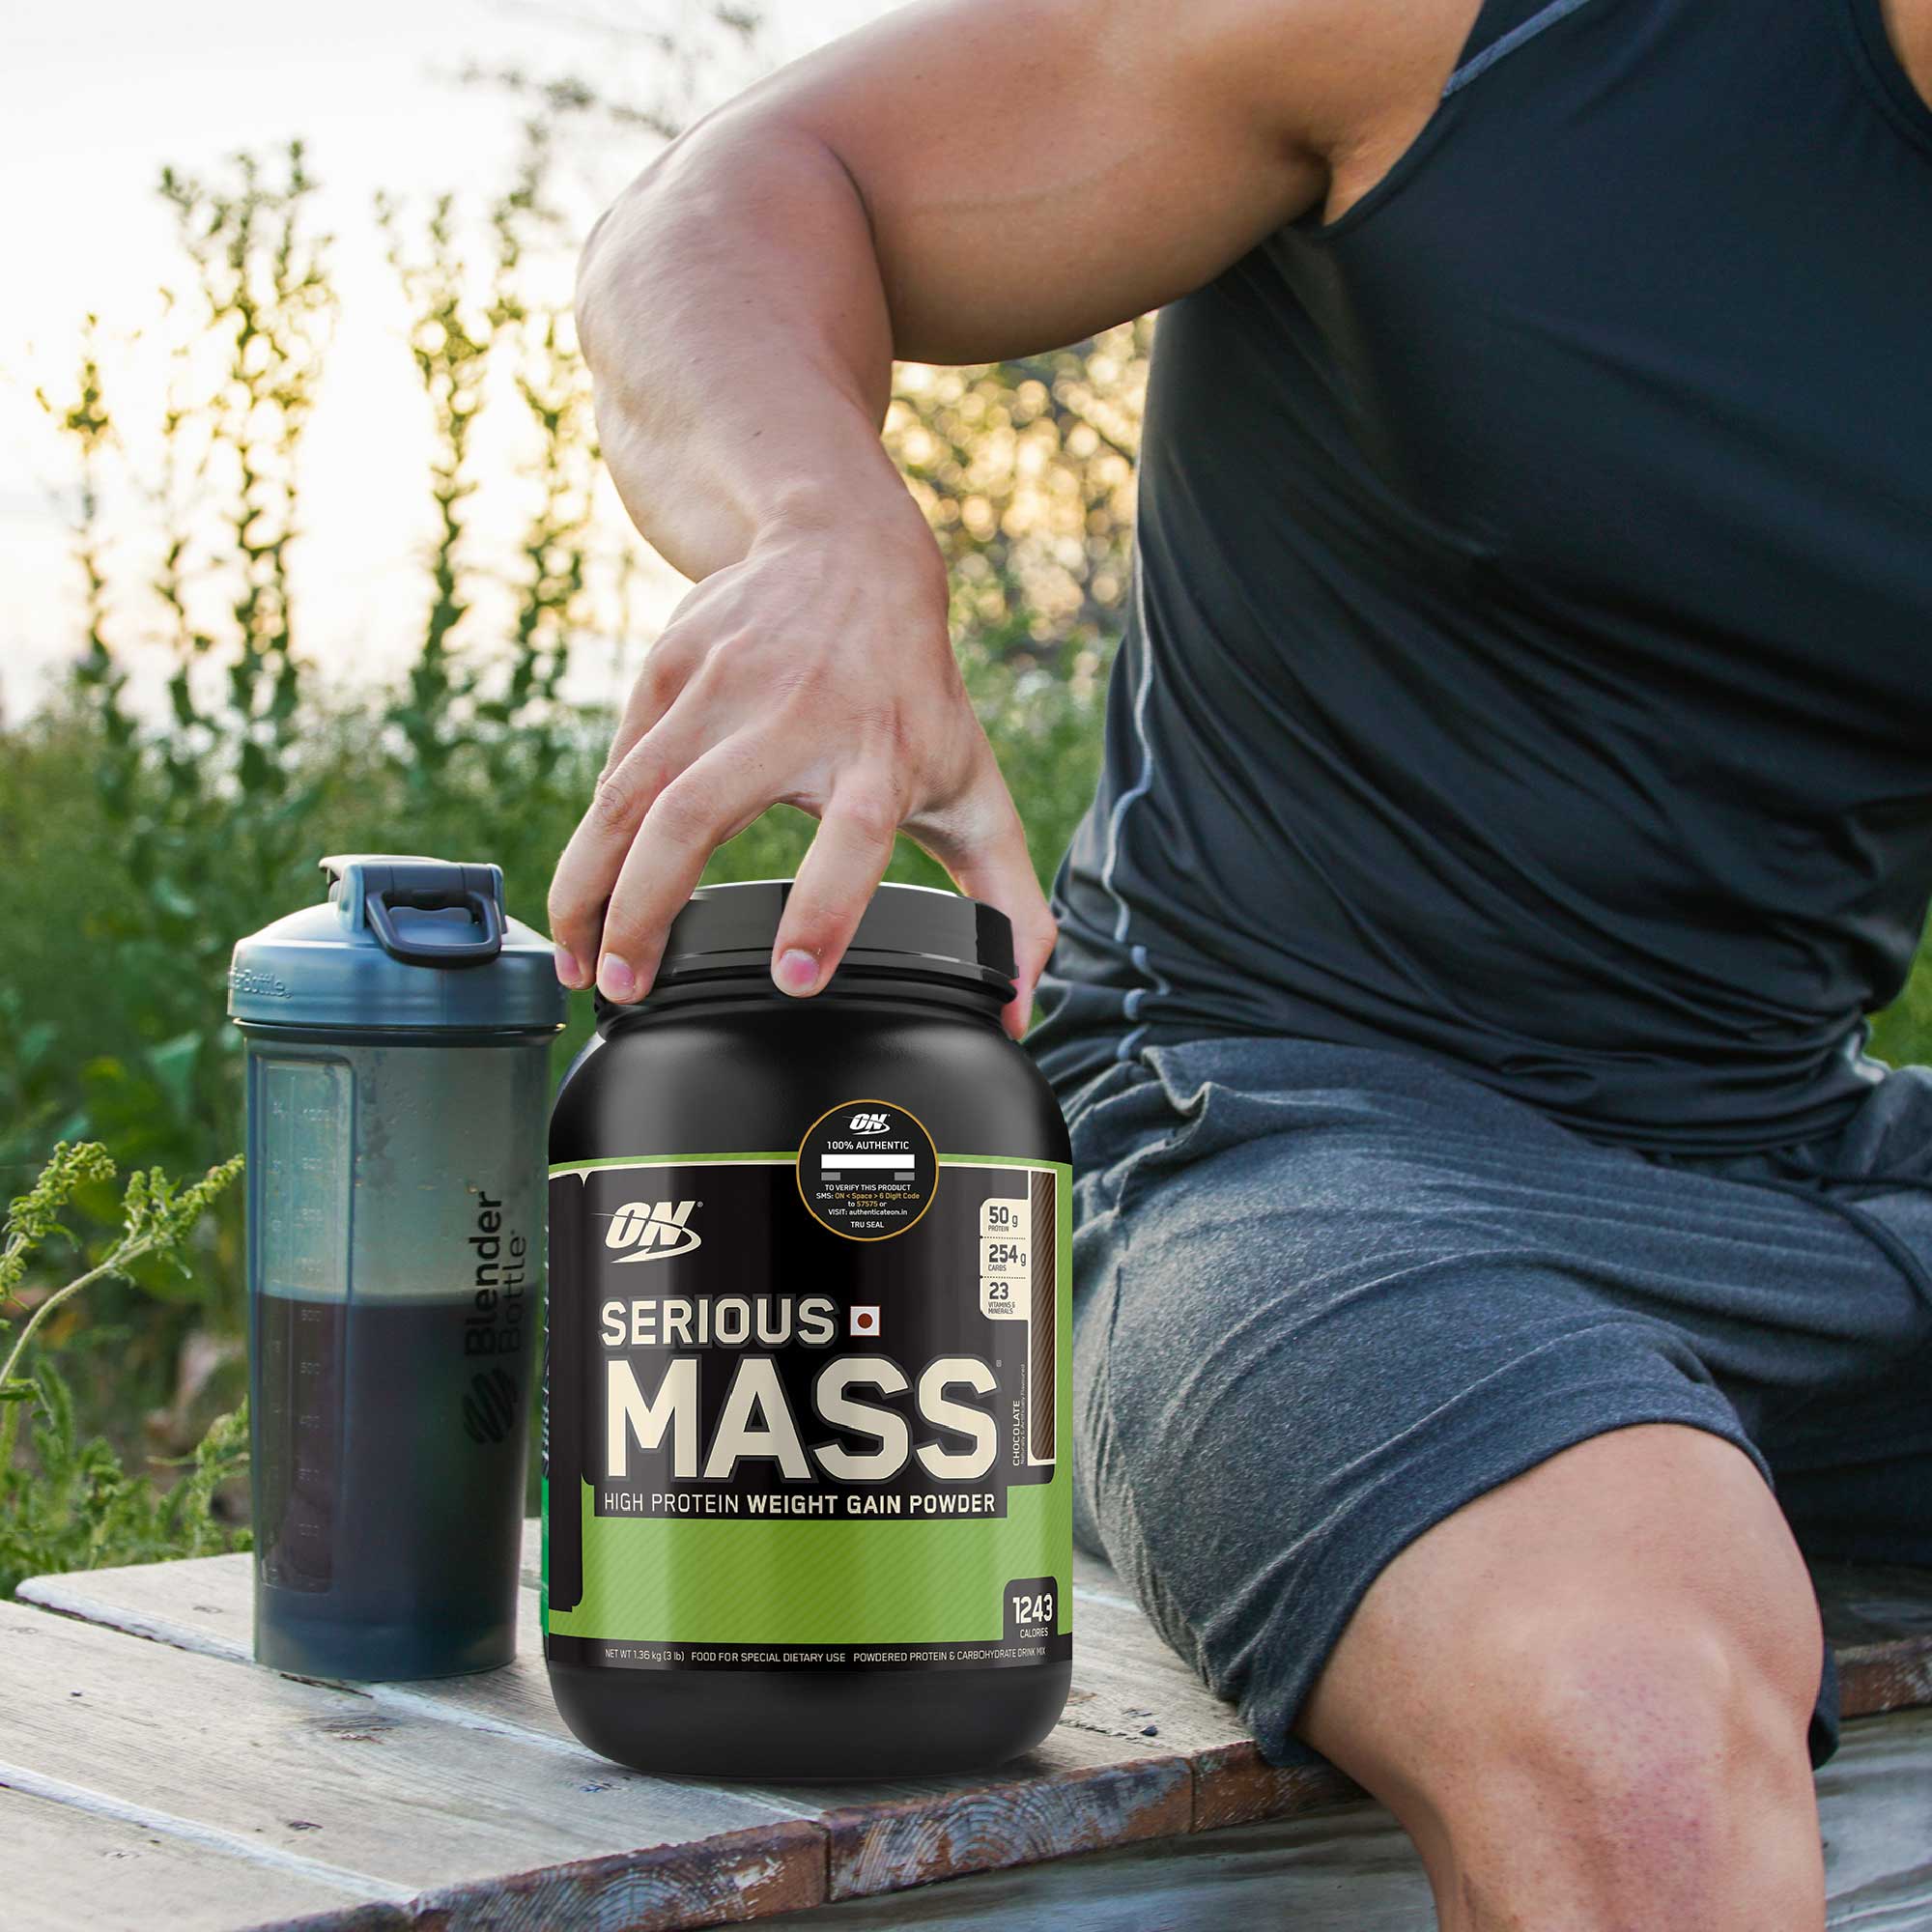 a man in gym gear placing his hand on a tub of serious mass powder